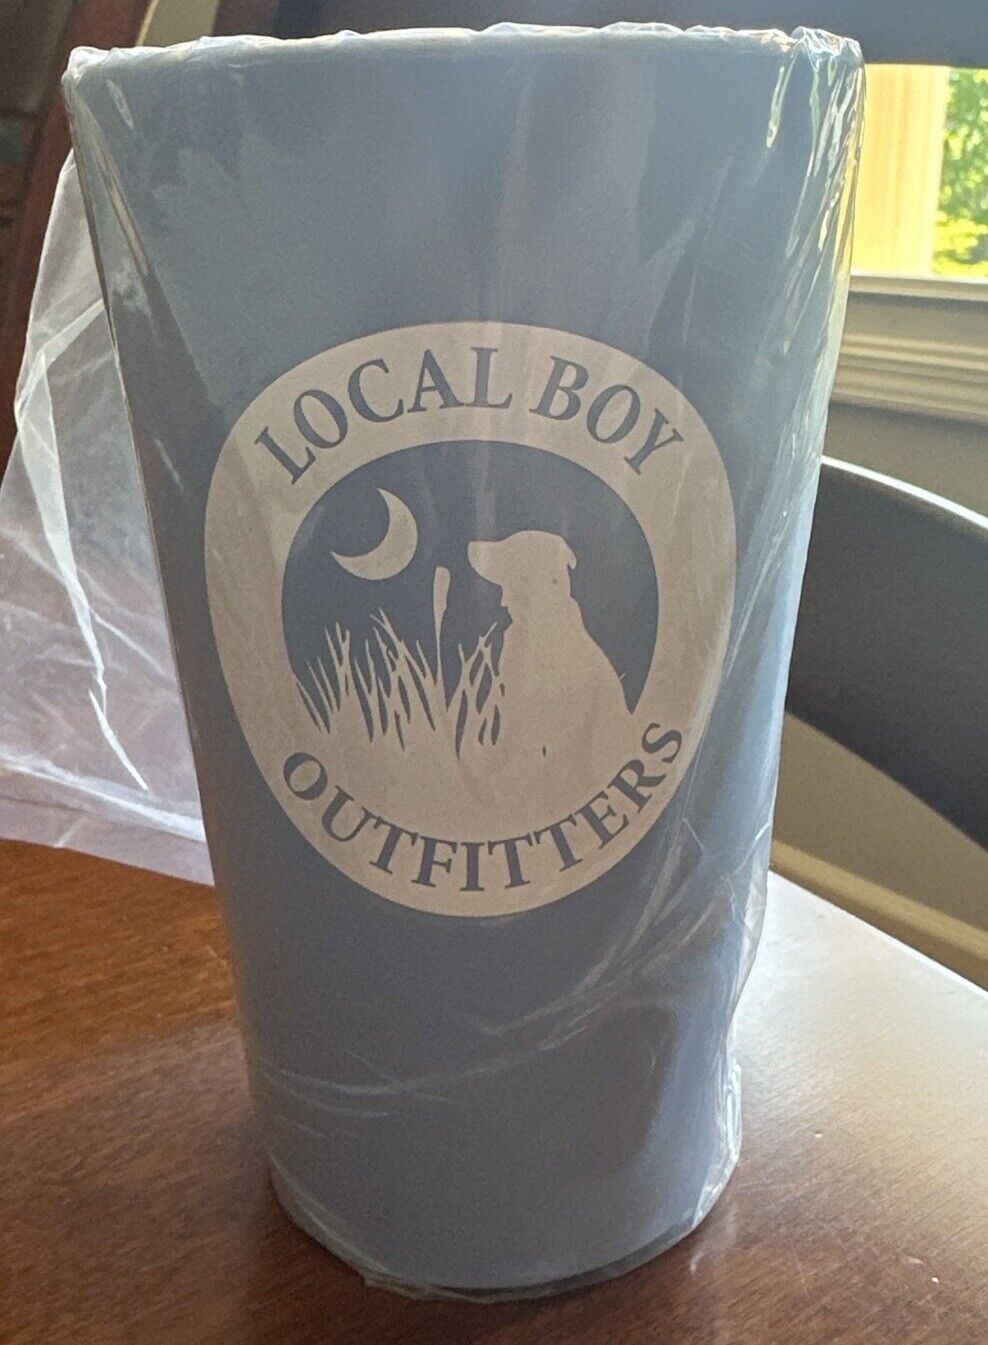 Local Boy Outfitters 16oz Cup | Baby Blue Silicone |Brand New Still In Packaging